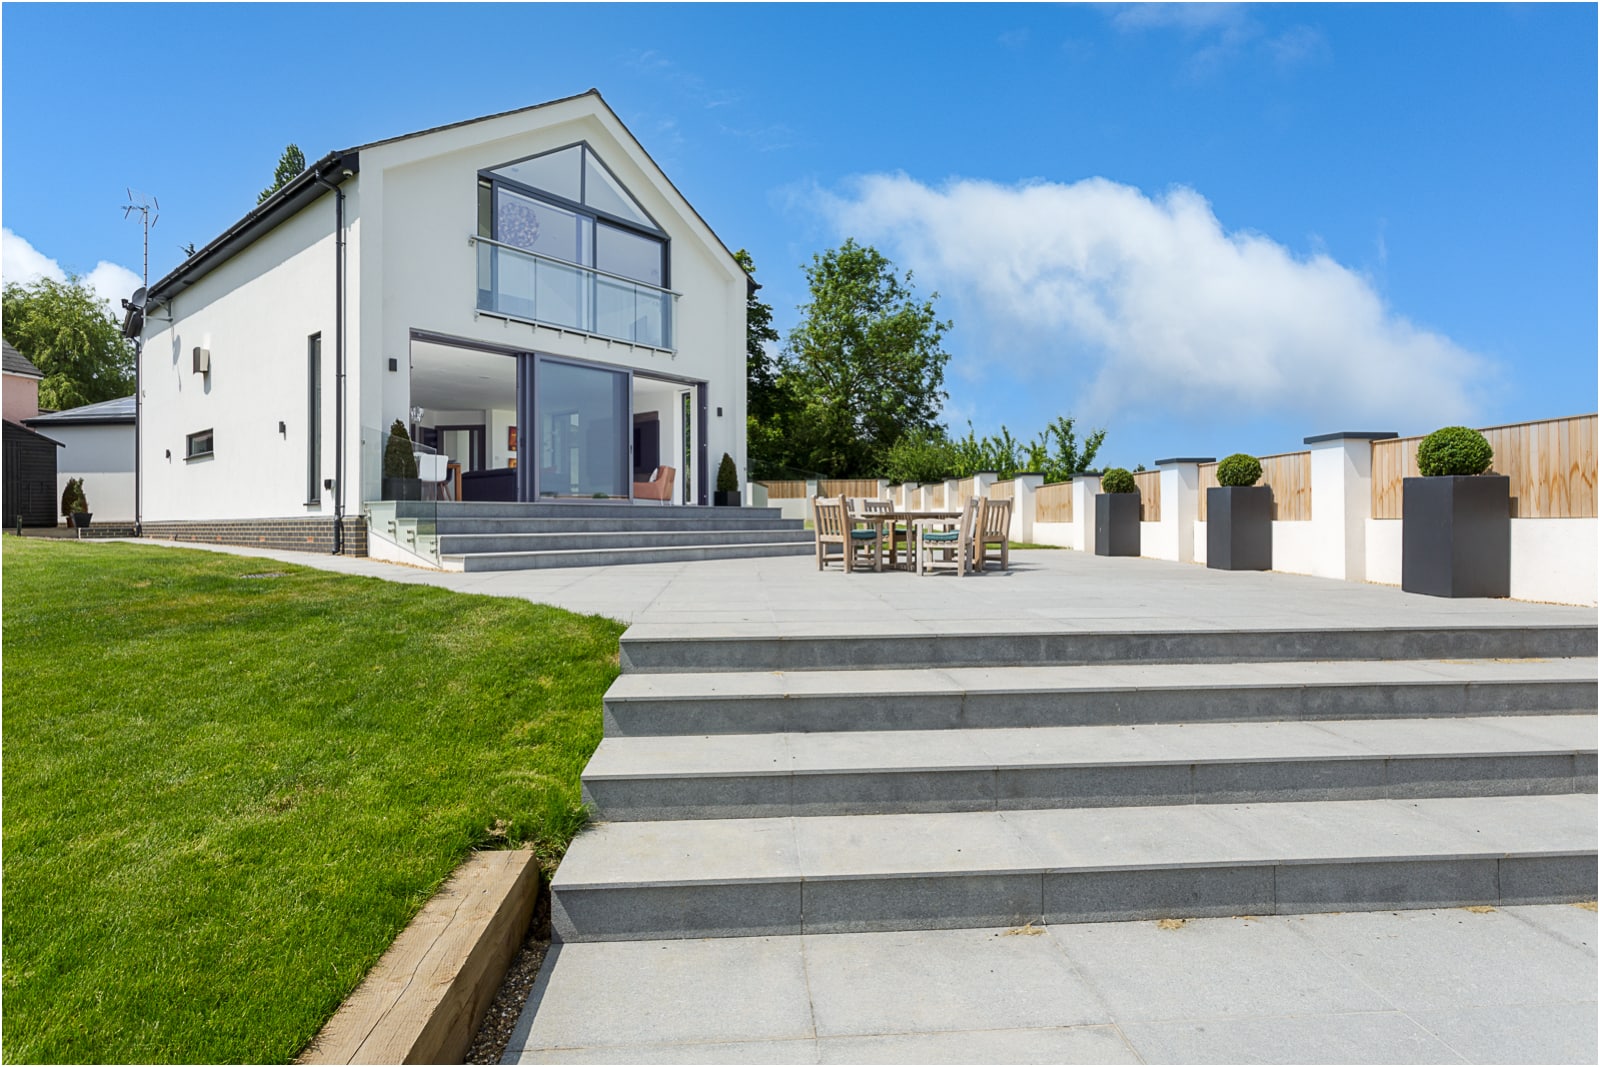 rear garden external view with extended steps towards house of a residential property